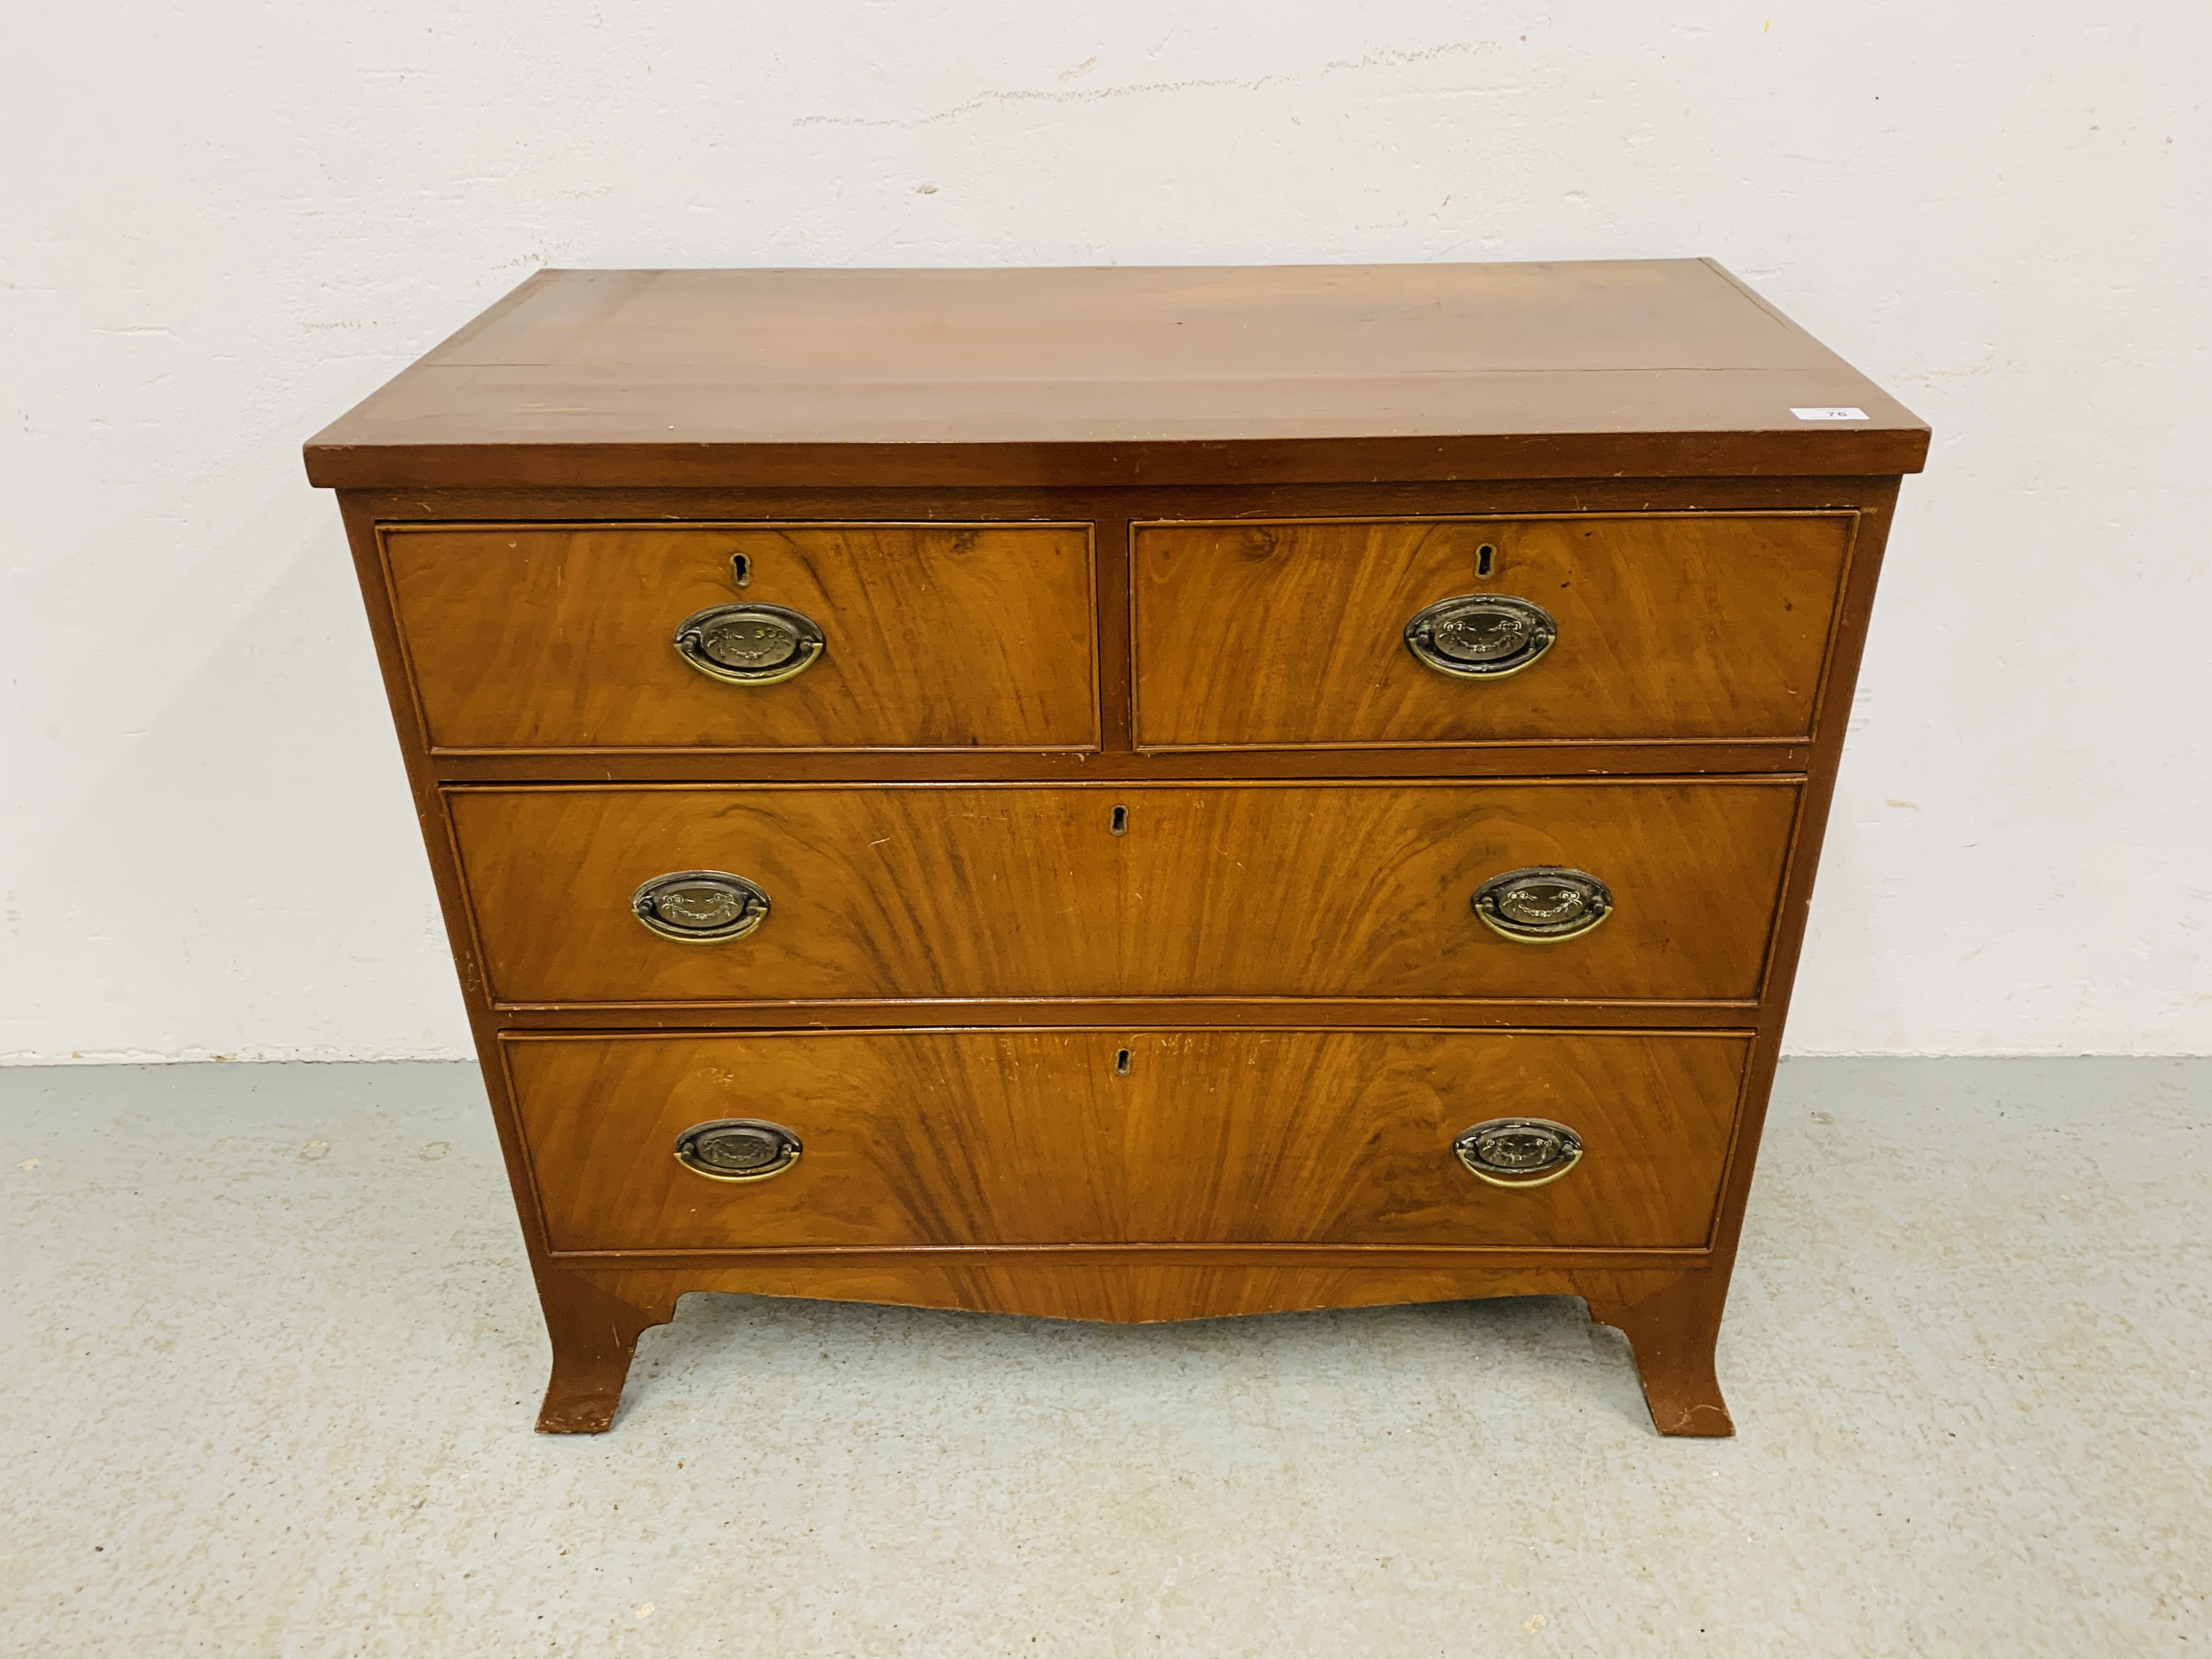 AN EARLY C19TH EDWARDIAN TWO OVER TWO DRAWER CHEST WITH BRASS HANDLES - W 91CM. D 44CM. H 80CM.